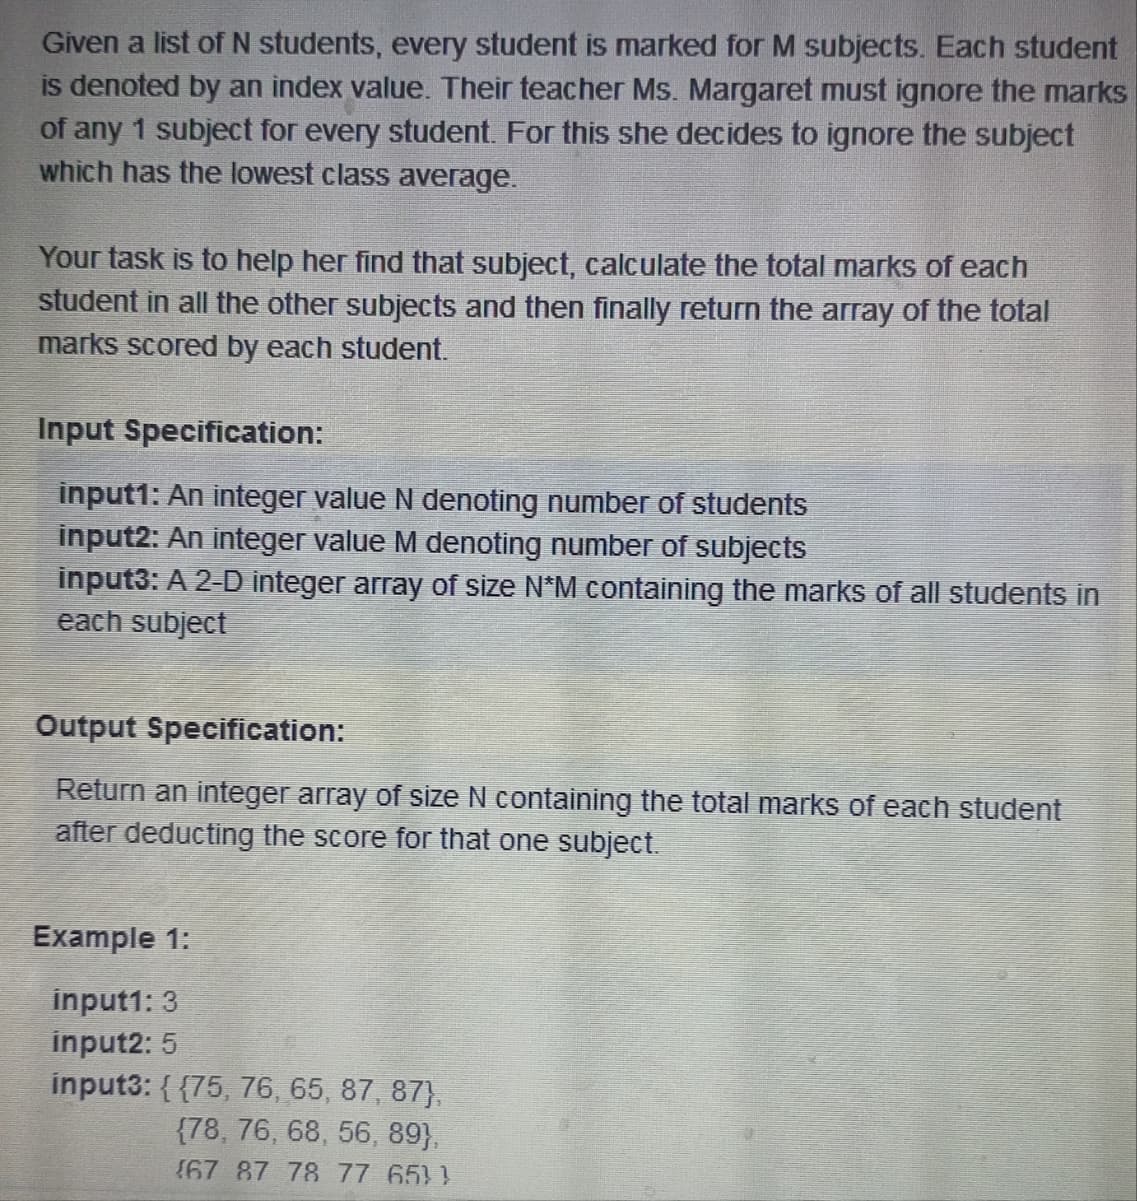 Given a list of N students, every student is marked for M subjects. Each student
is denoted by an index value. Their teacher Ms. Margaret must ignore the marks
of any 1 subject for every student. For this she decides to ignore the subject
which has the lowest class average.
Your task is to help her find that subject, calculate the total marks of each
student in all the other subjects and then finally return the array of the total
marks scored by each student.
Input Specification:
input1: An integer value N denoting number of students
input2: An integer value M denoting number of subjects
input3: A 2-D integer array of size N*M containing the marks of all students in
each subject
Output Specification:
Return an integer array of size N containing the total marks of each student
after deducting the score for that one subject.
Example 1:
input1: 3
input2: 5
input3: {{75, 76, 65, 87, 87),
(78, 76, 68, 56, 89},
(67 87 78 77 651)